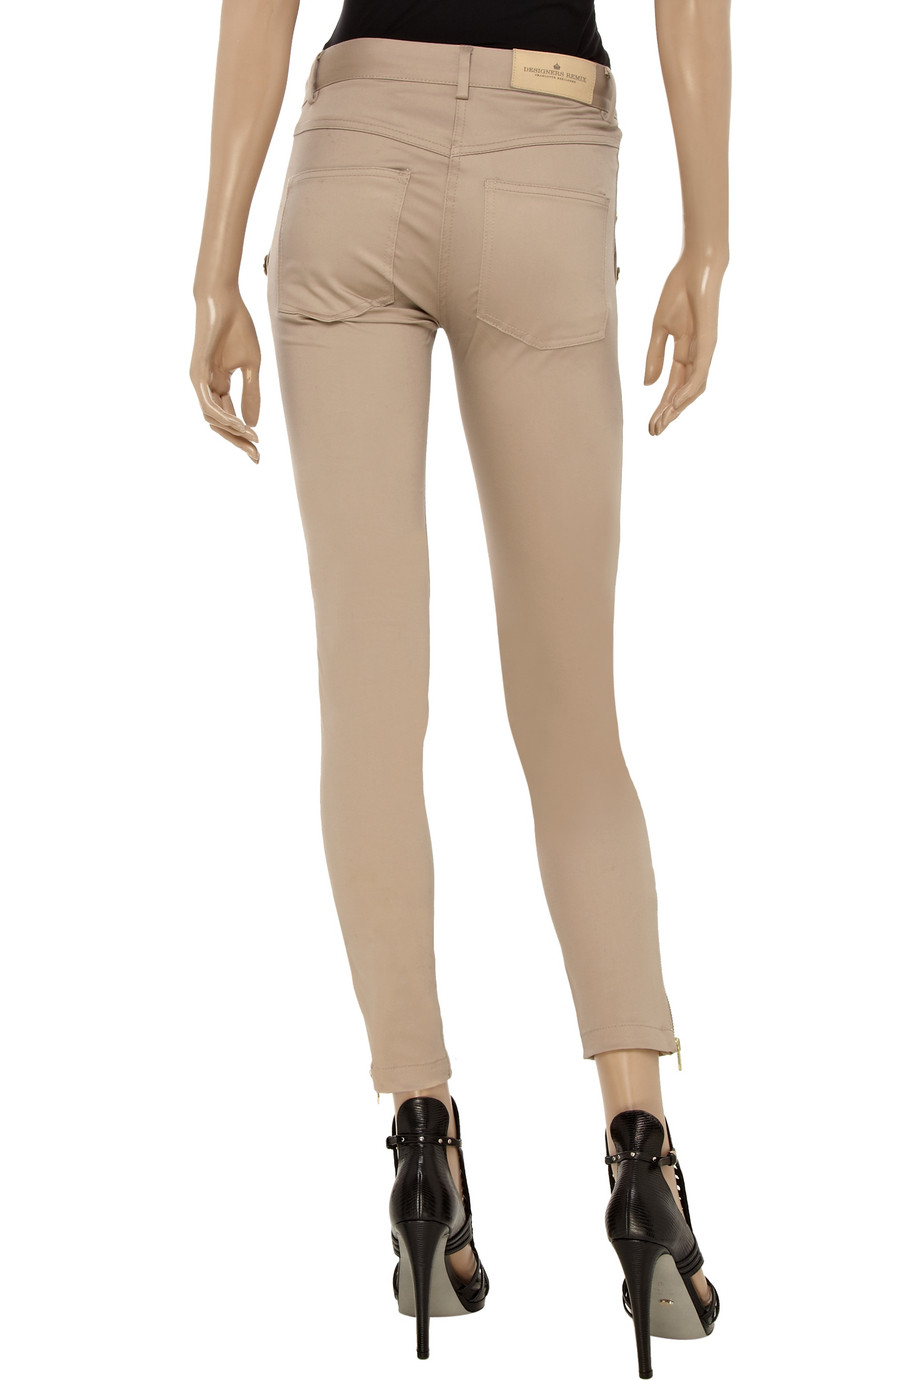 Designers Remix Seazipit Stretch-cotton Pants in Camel (Natural) - Lyst